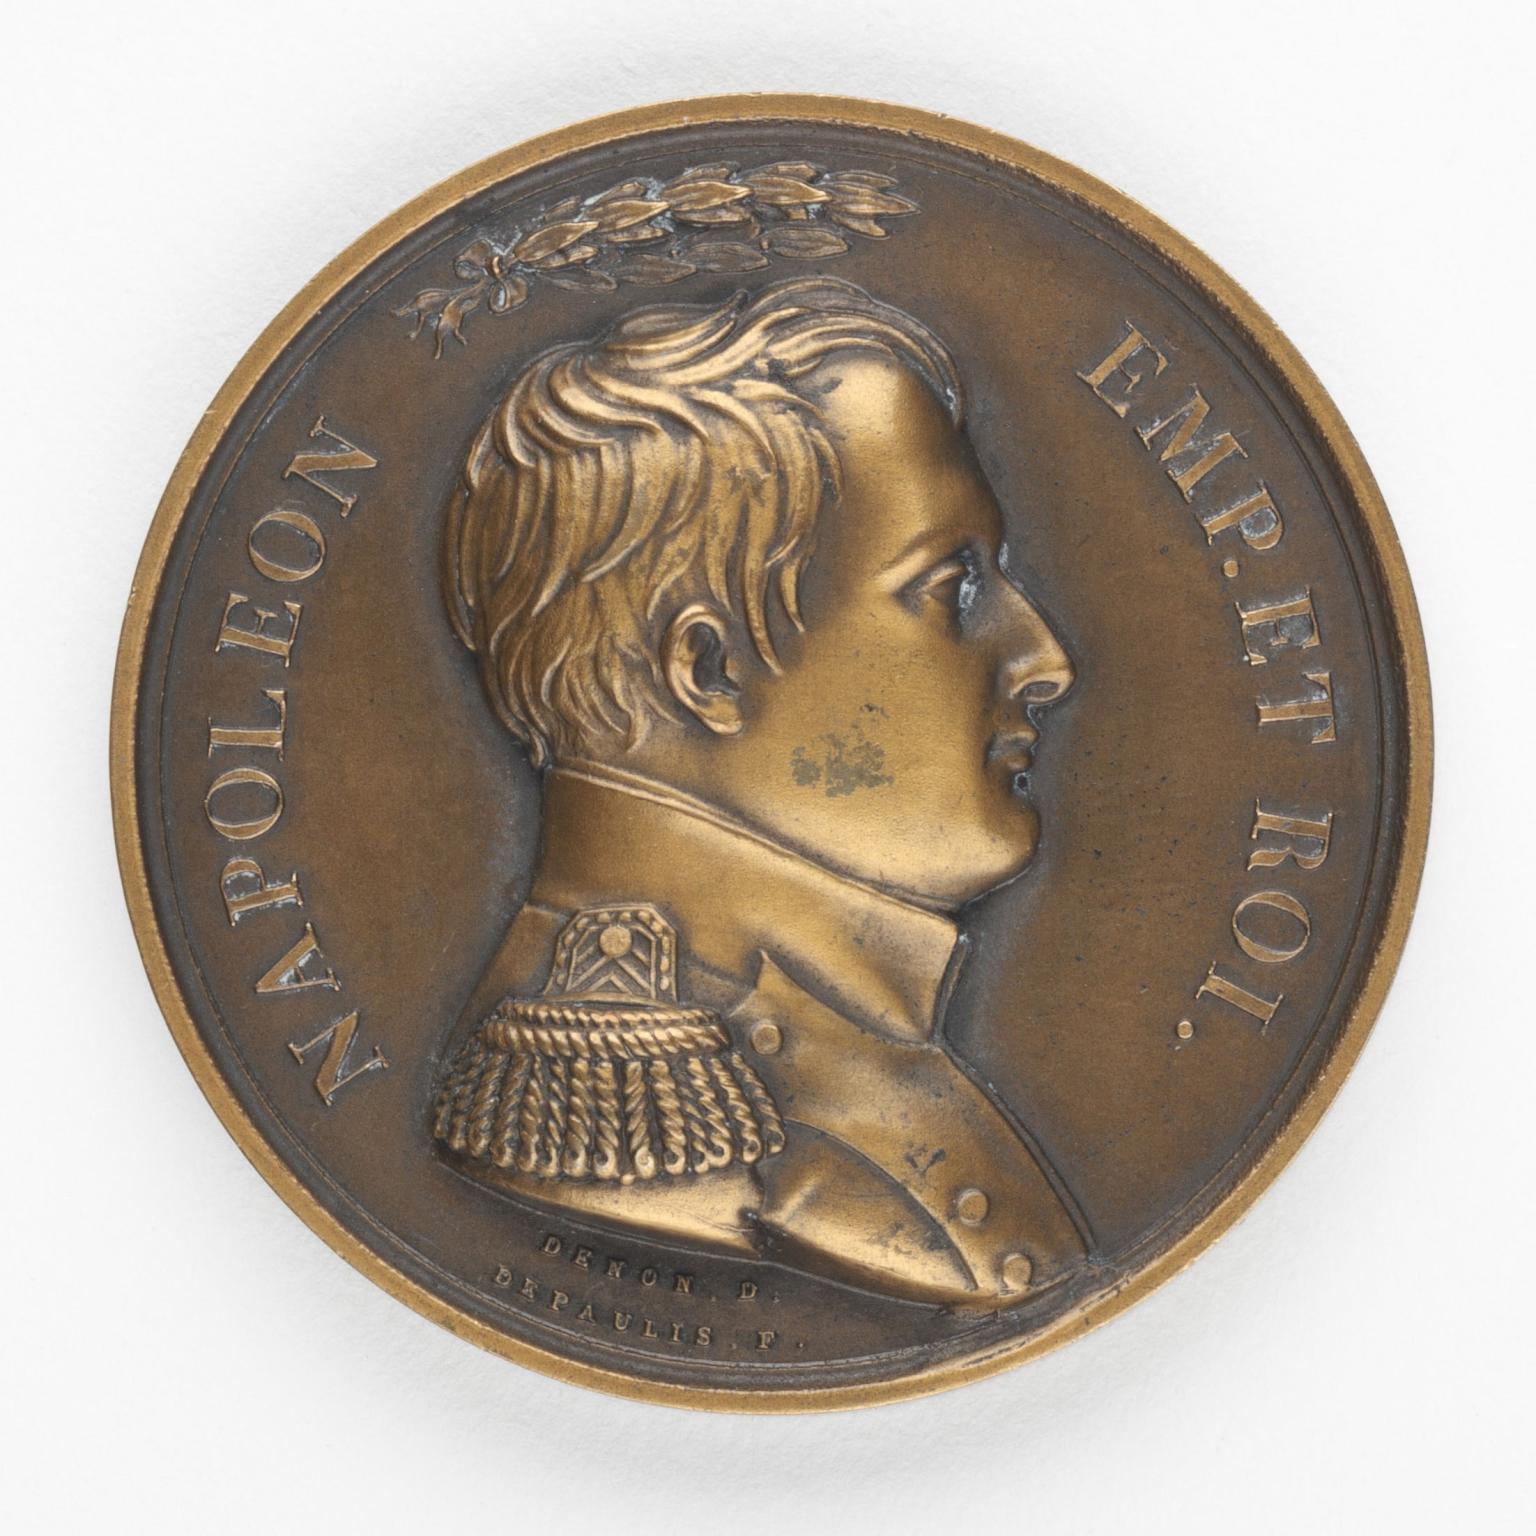 Bronze medal featuring profile of man in epaulets and laurel above head and Latin text.